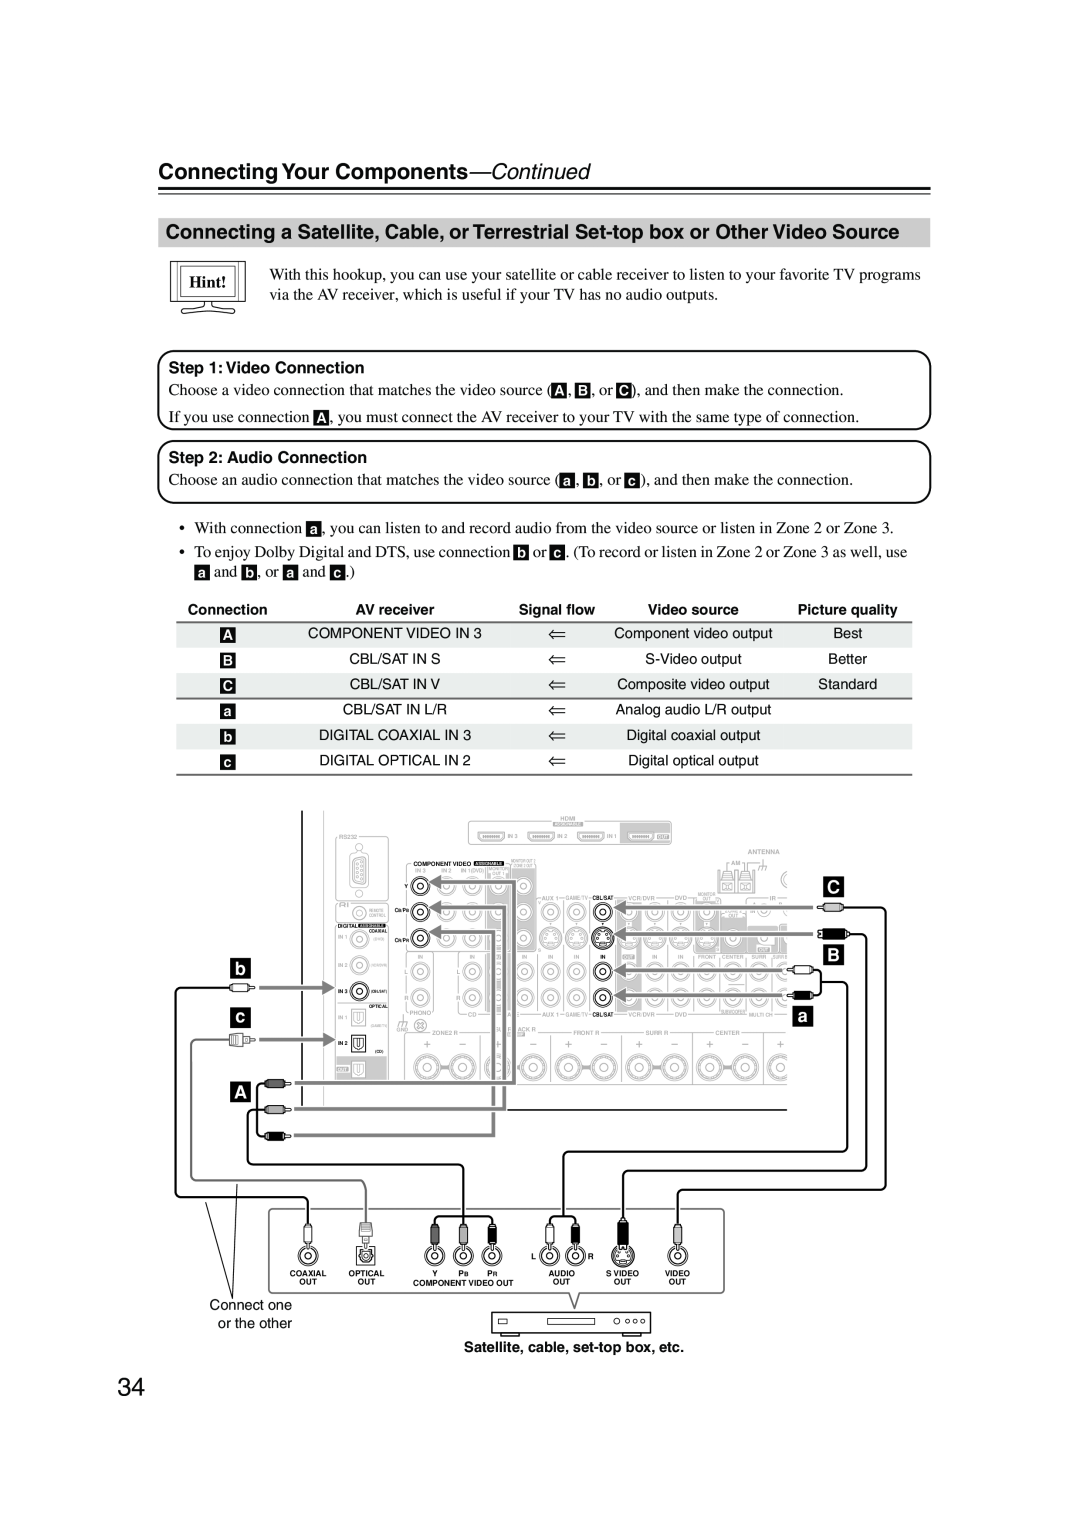 Integra DTR-7.8 instruction manual Connecting Your Components—Continued, b c A, Hint, Satellite, cable, set-topbox, etc 